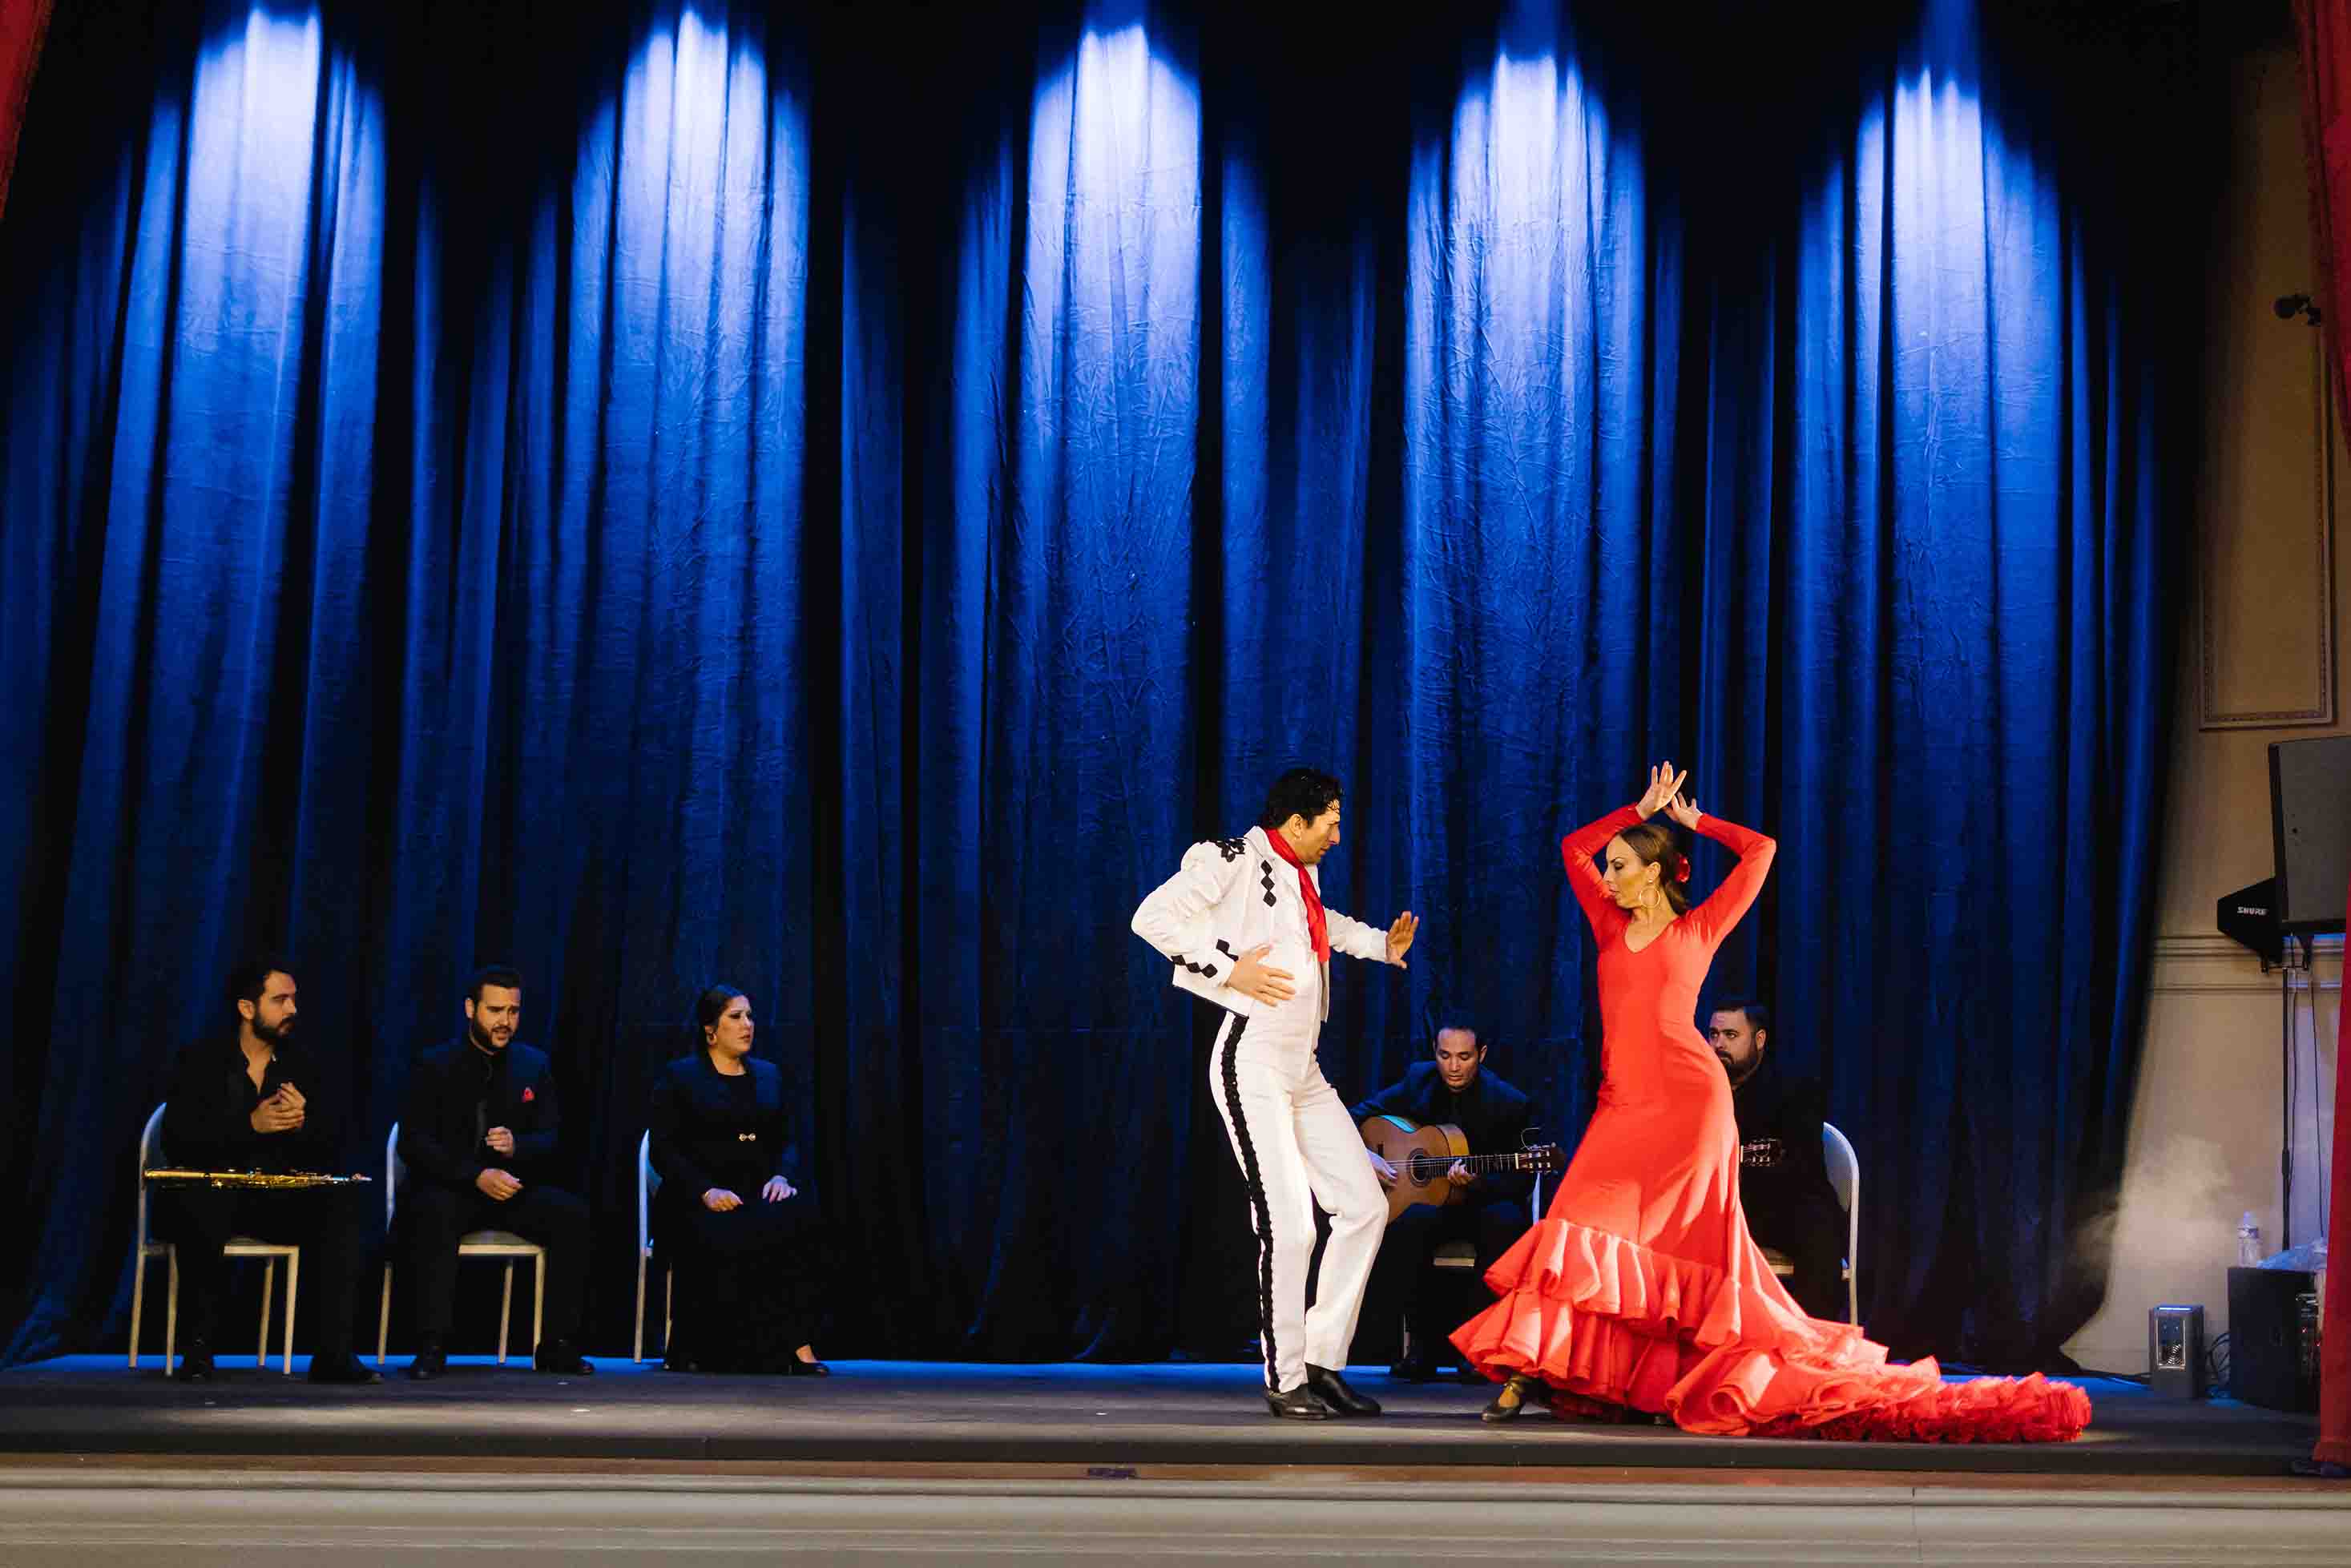 A man dancing flamenco at the Authentic Flamenco show in NYC - Authentic Flamenco in Brussels: A Traditional Spanish Show